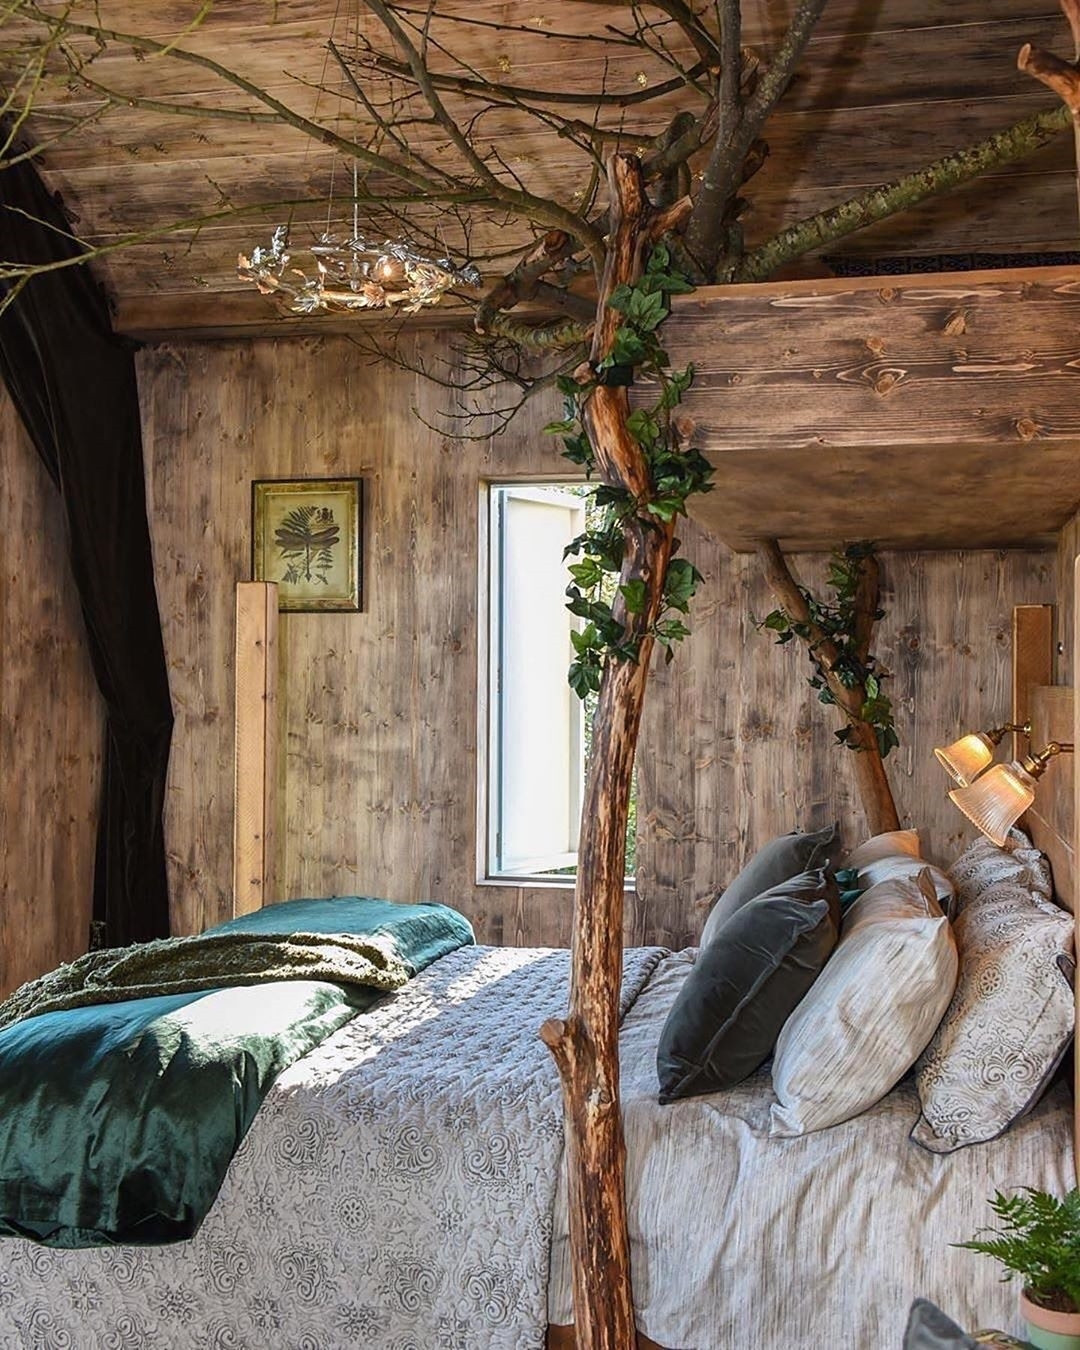 48 Small Cabin Decorating Ideas For Every Home